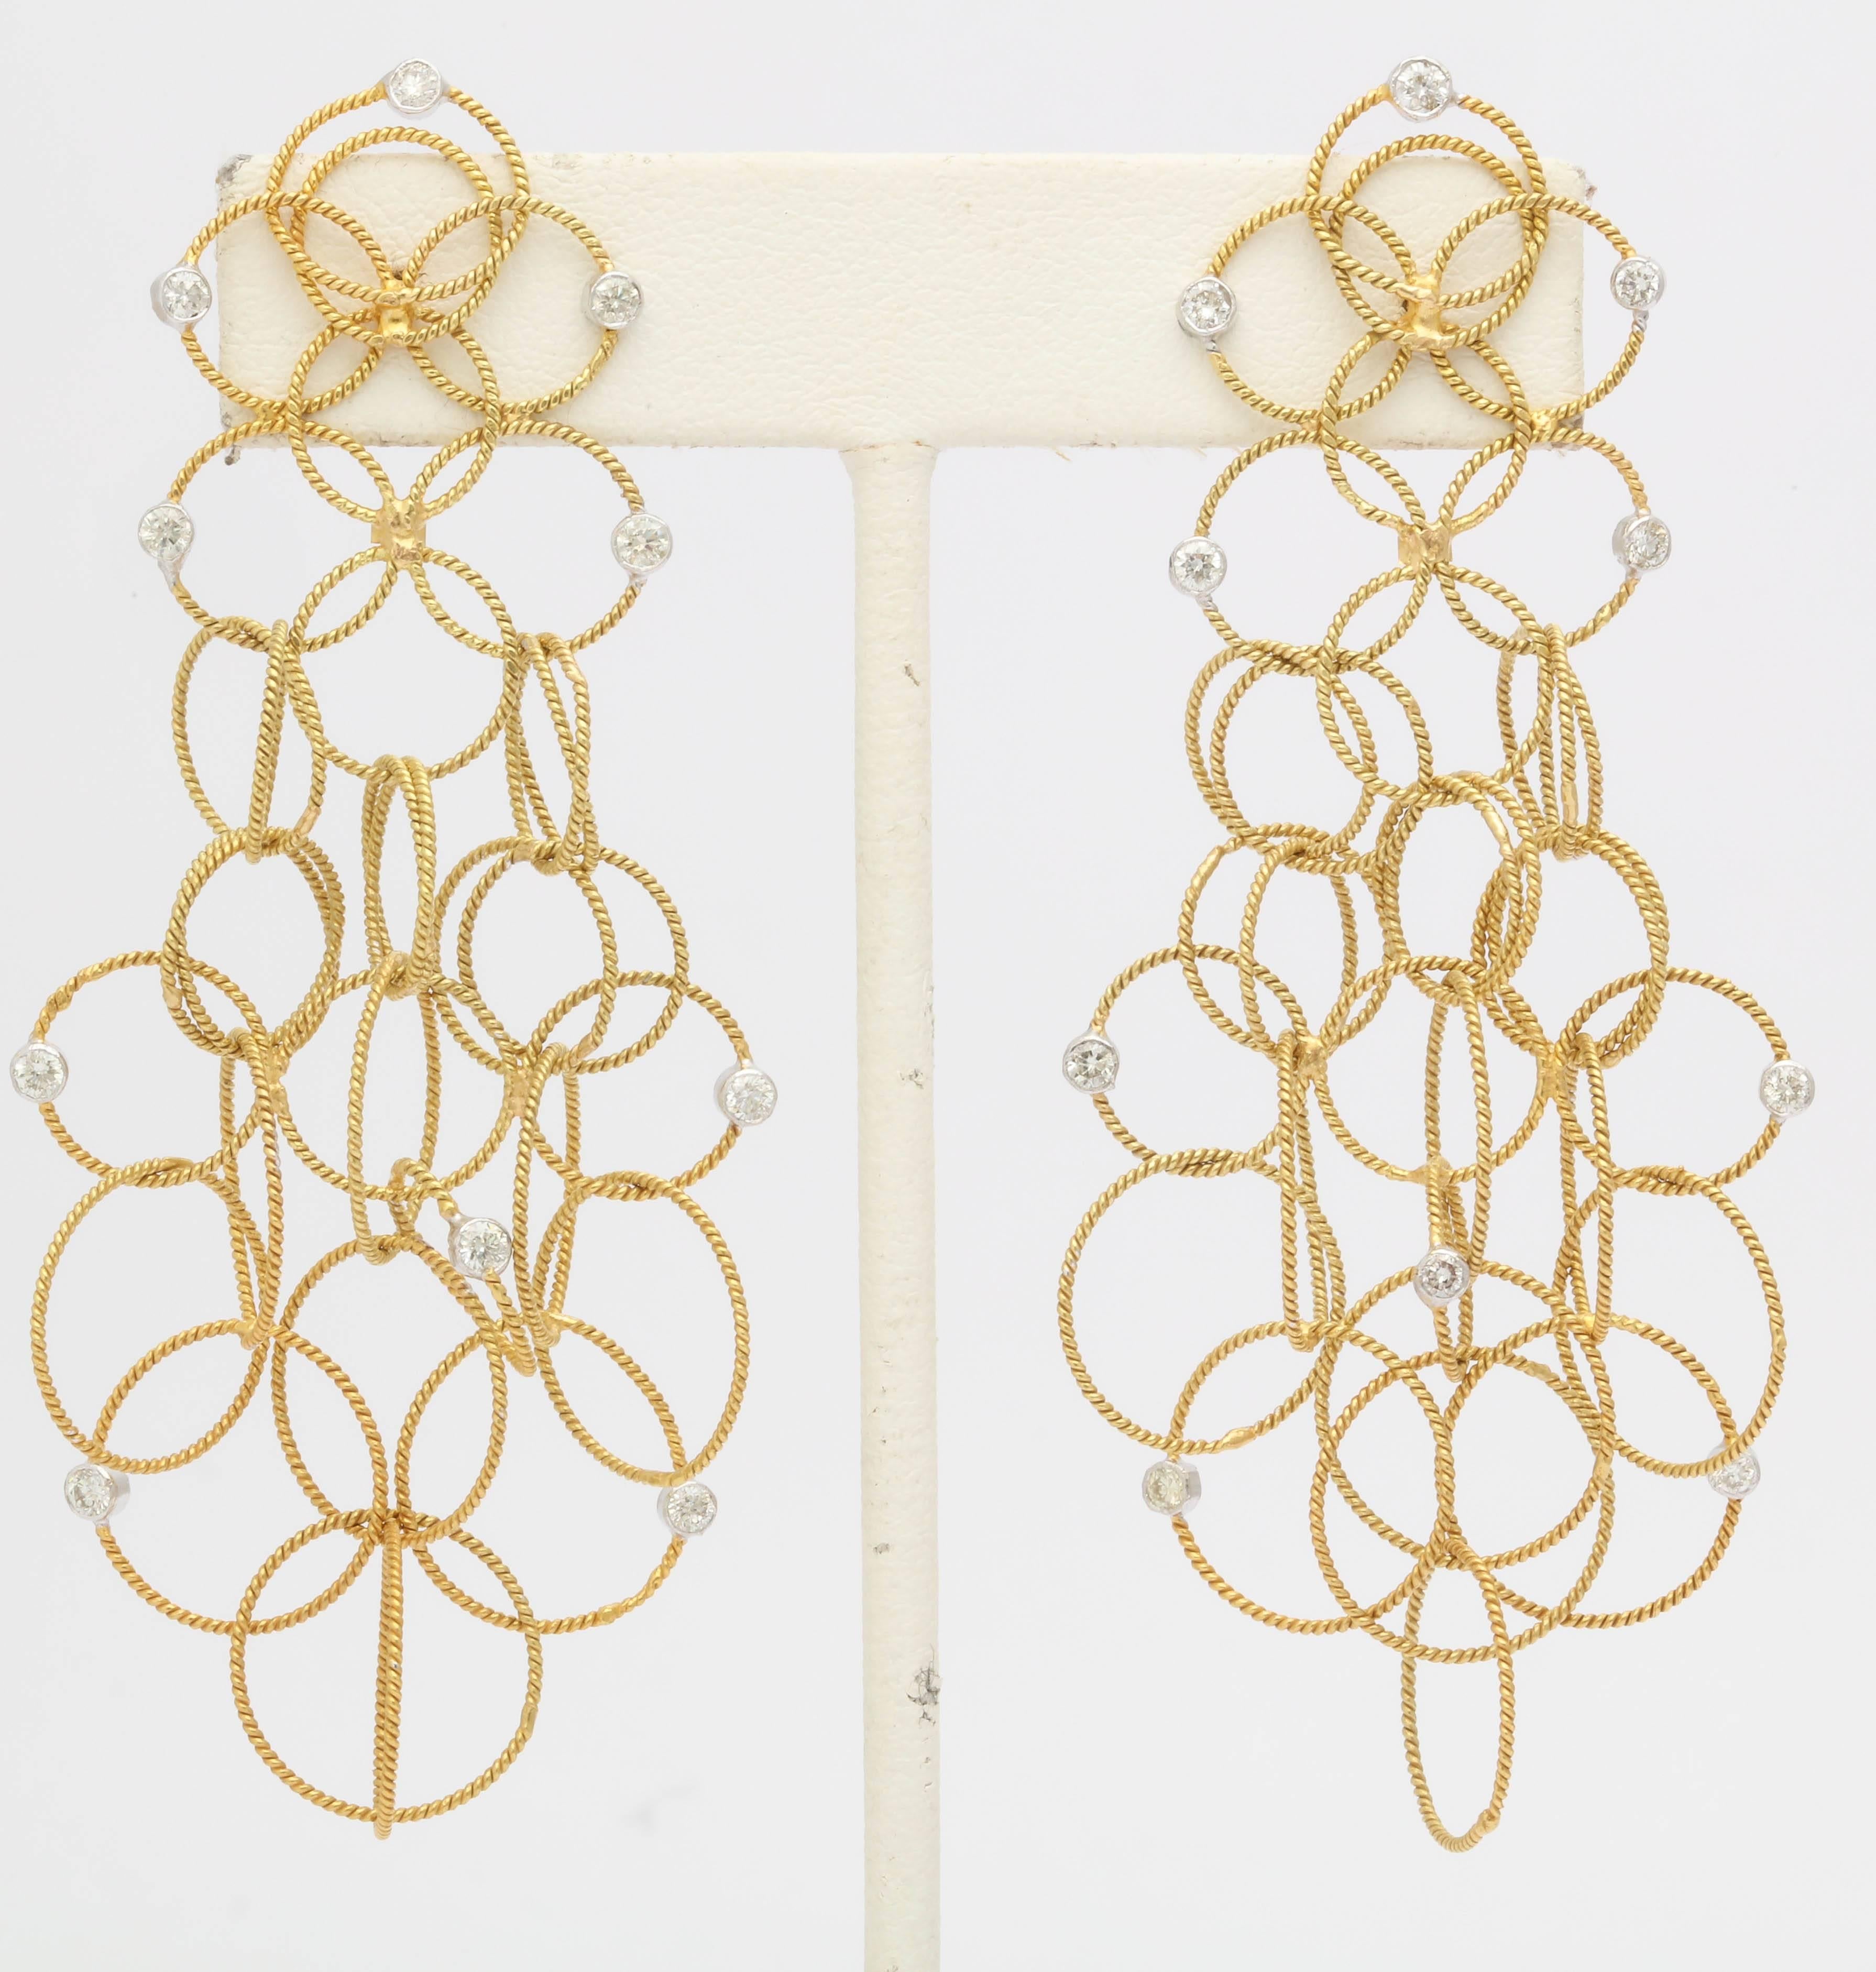 These spectacular dangling earrings are 2 1/2 in. long.The white diamonds are 1.12 tw. The metal is a gorgeous rich yellow 18 kt gold.The earring looks rich but is light weight. The loops are interlocked and move beautiful as you wear them. Also